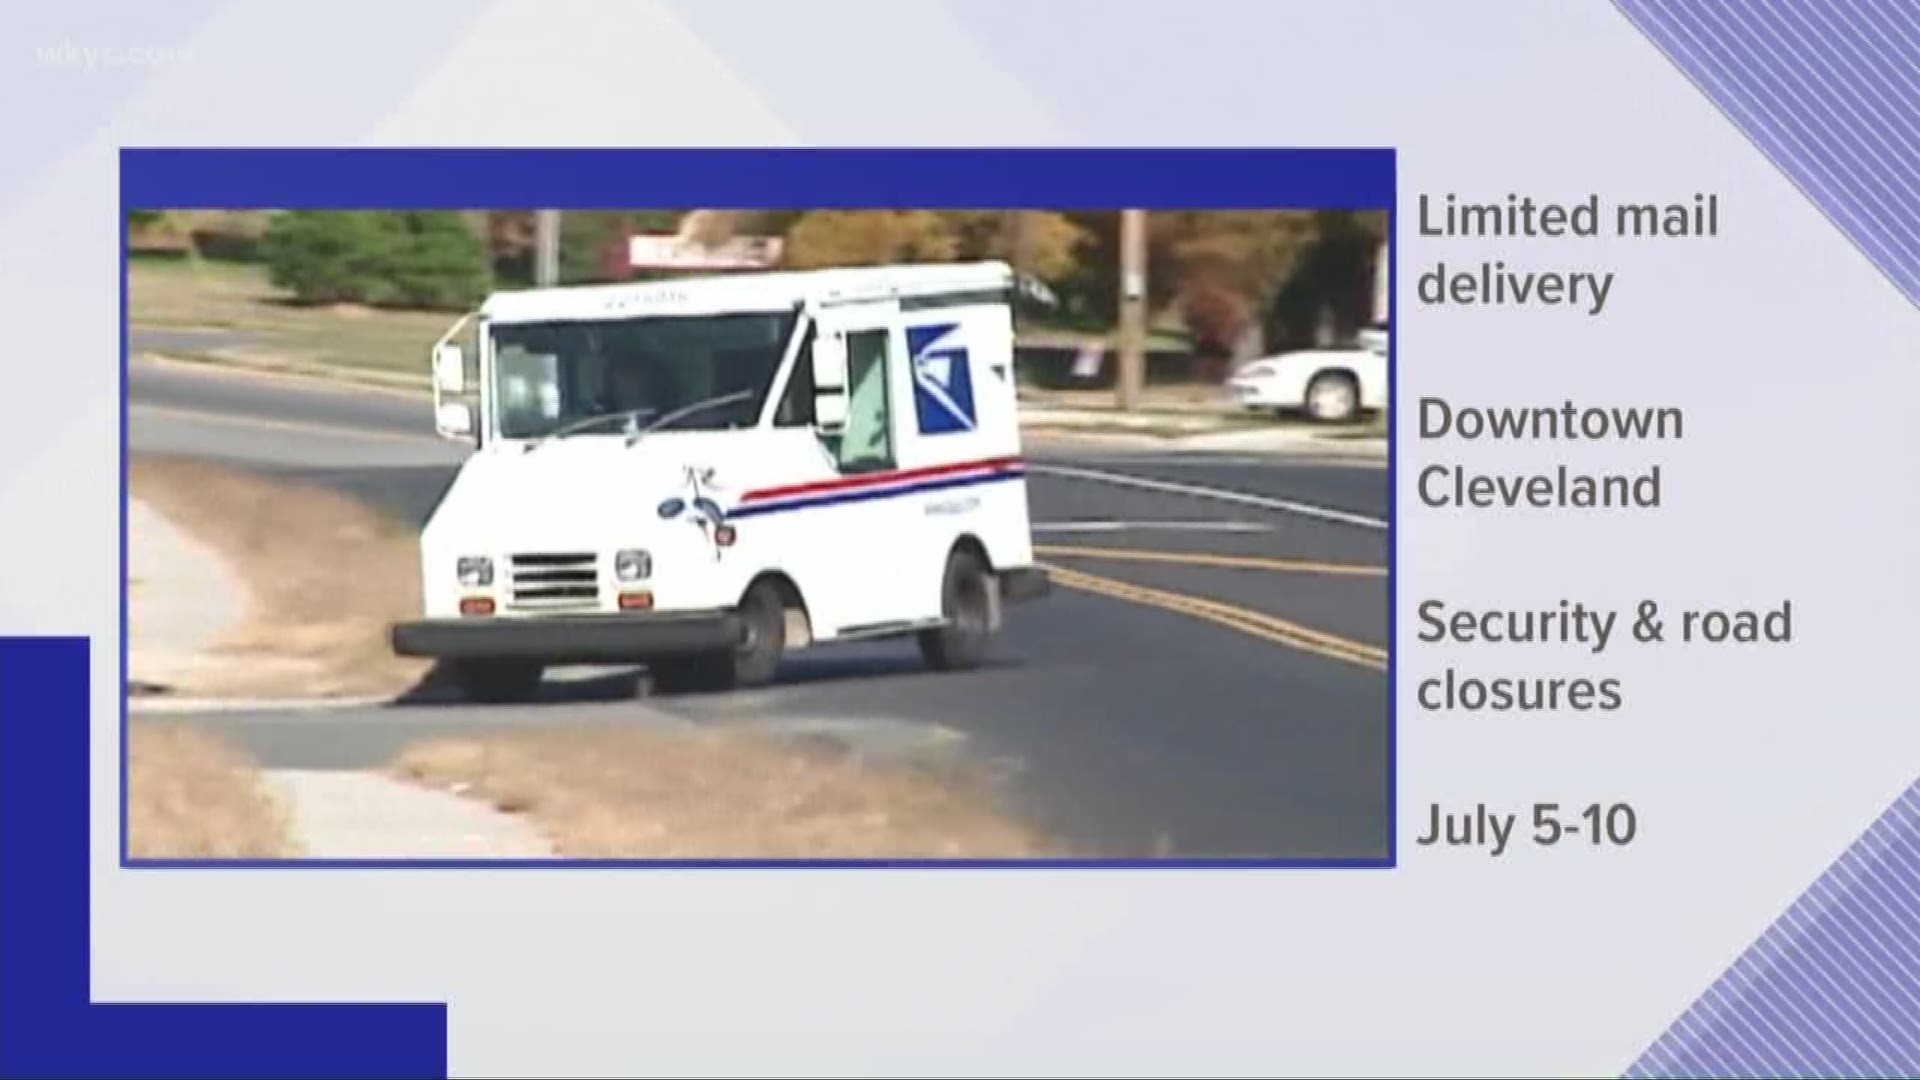 Mail delivery will be limited July 5-10 due to heightened security and road closures. Since postal workers may have difficulty accessing drop boxes, customers should drop off mail at a USPS retail office.